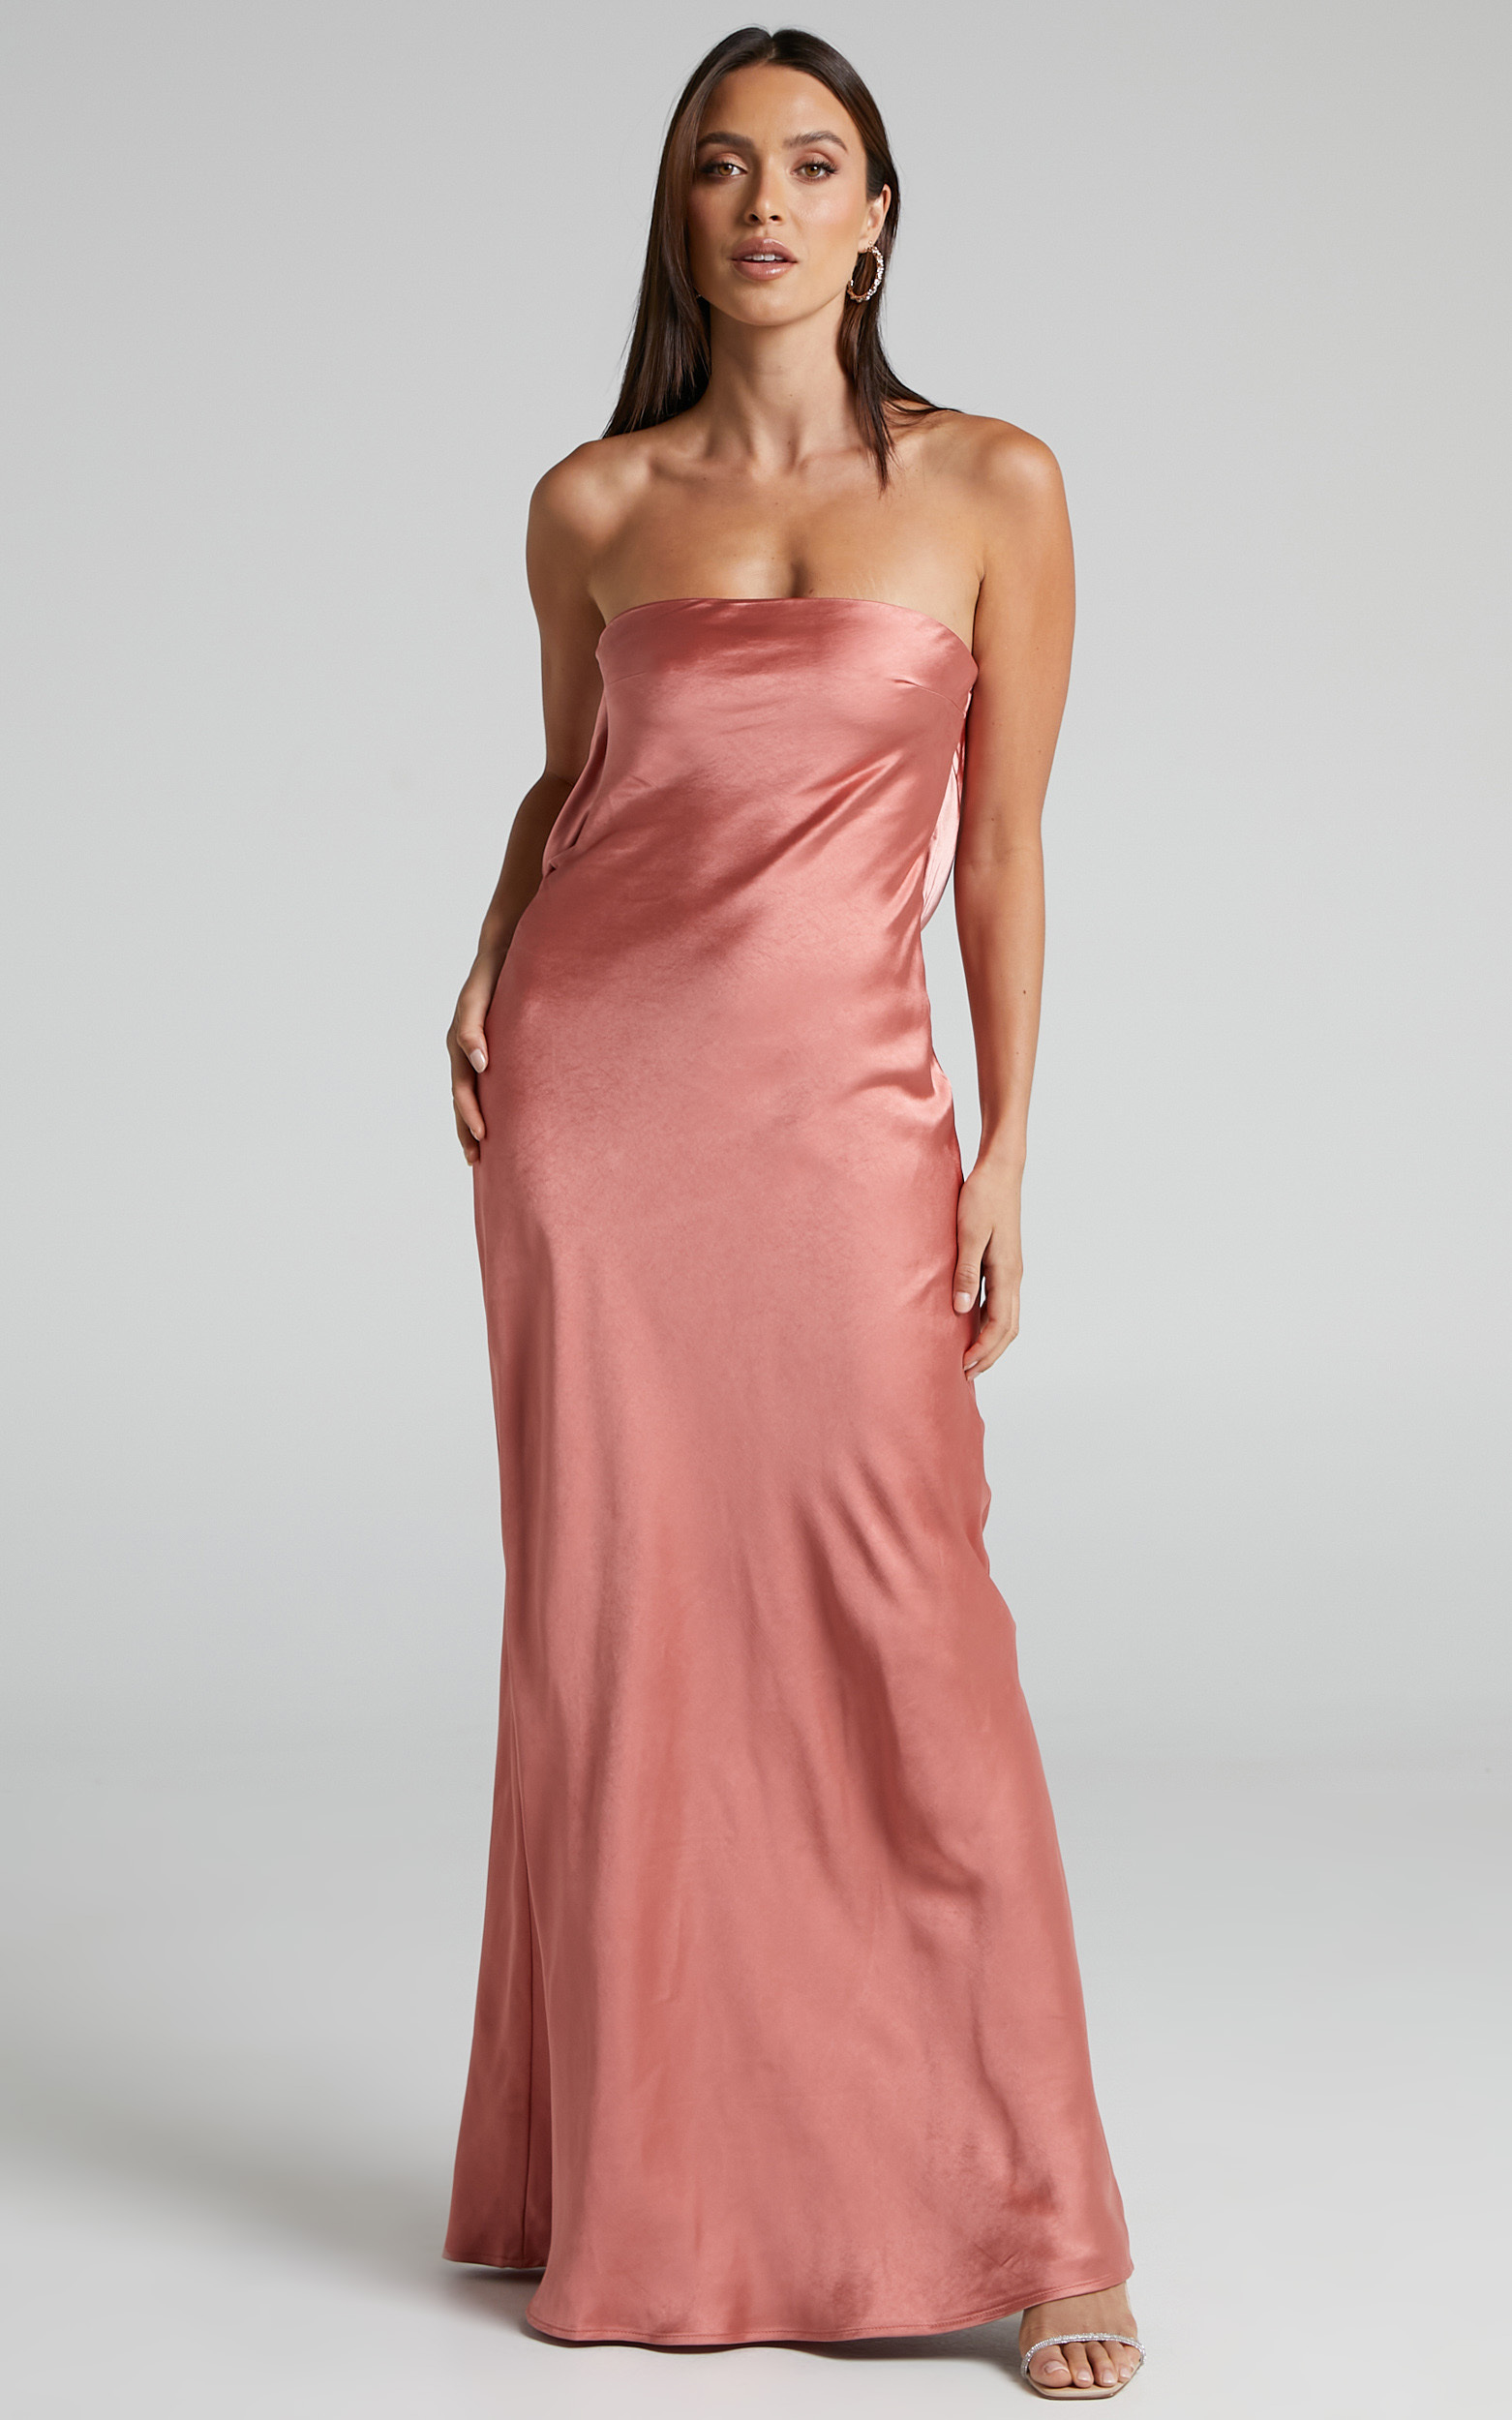 Charlita Strapless Cowl Back Satin Maxi Dress in Peach - 06, ORG1, hi-res image number null